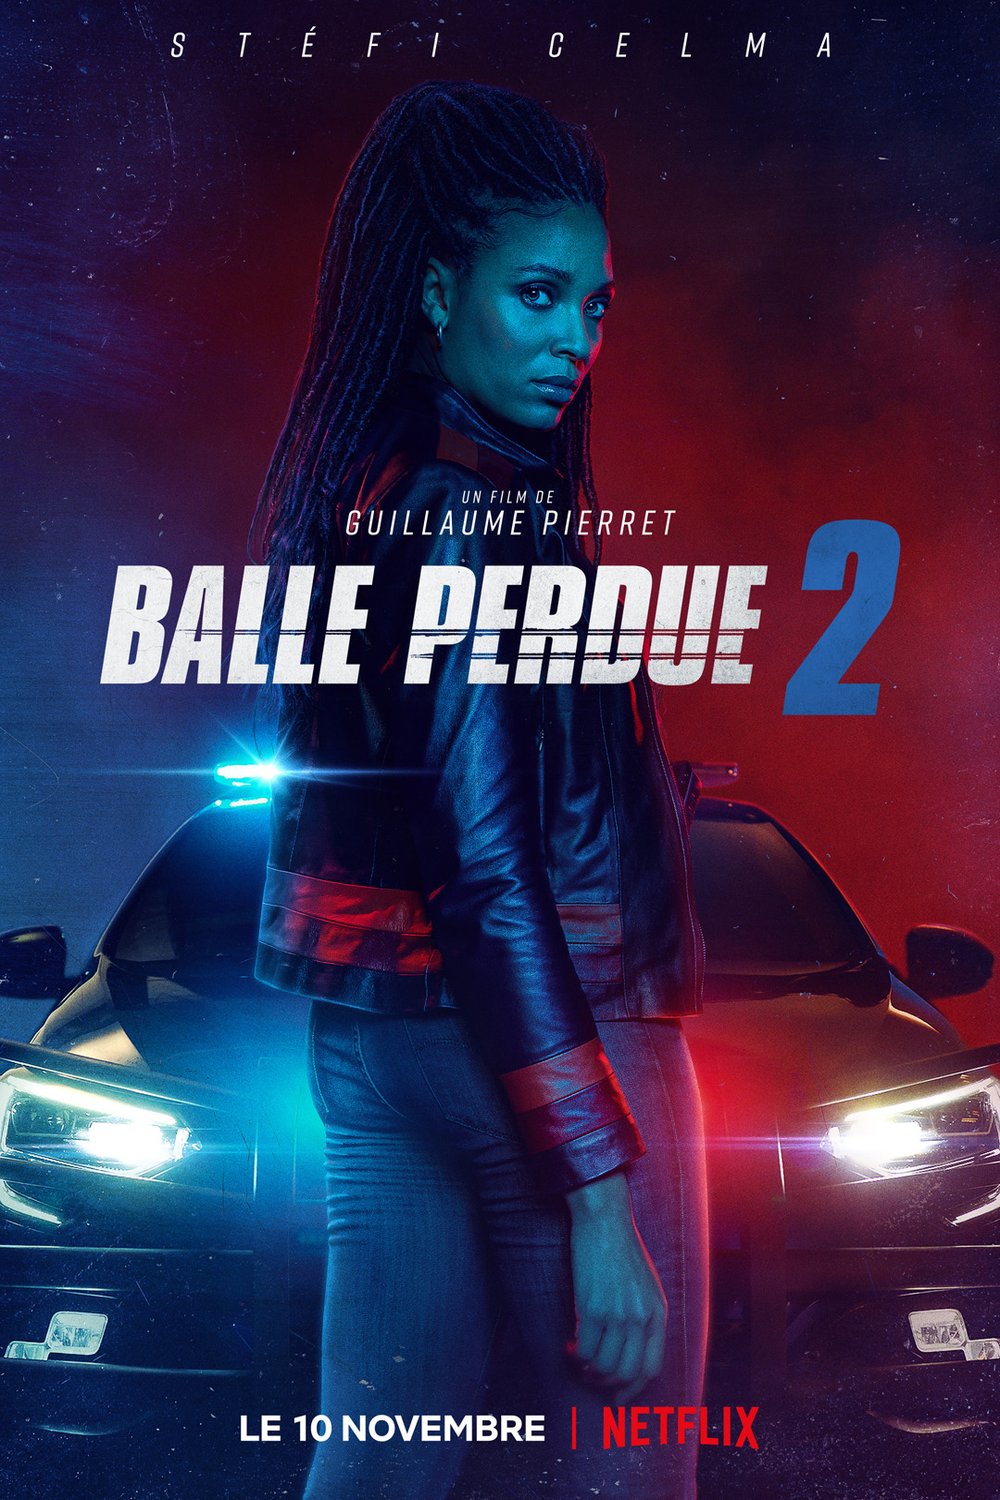 Poster of the movie Balle perdue 2